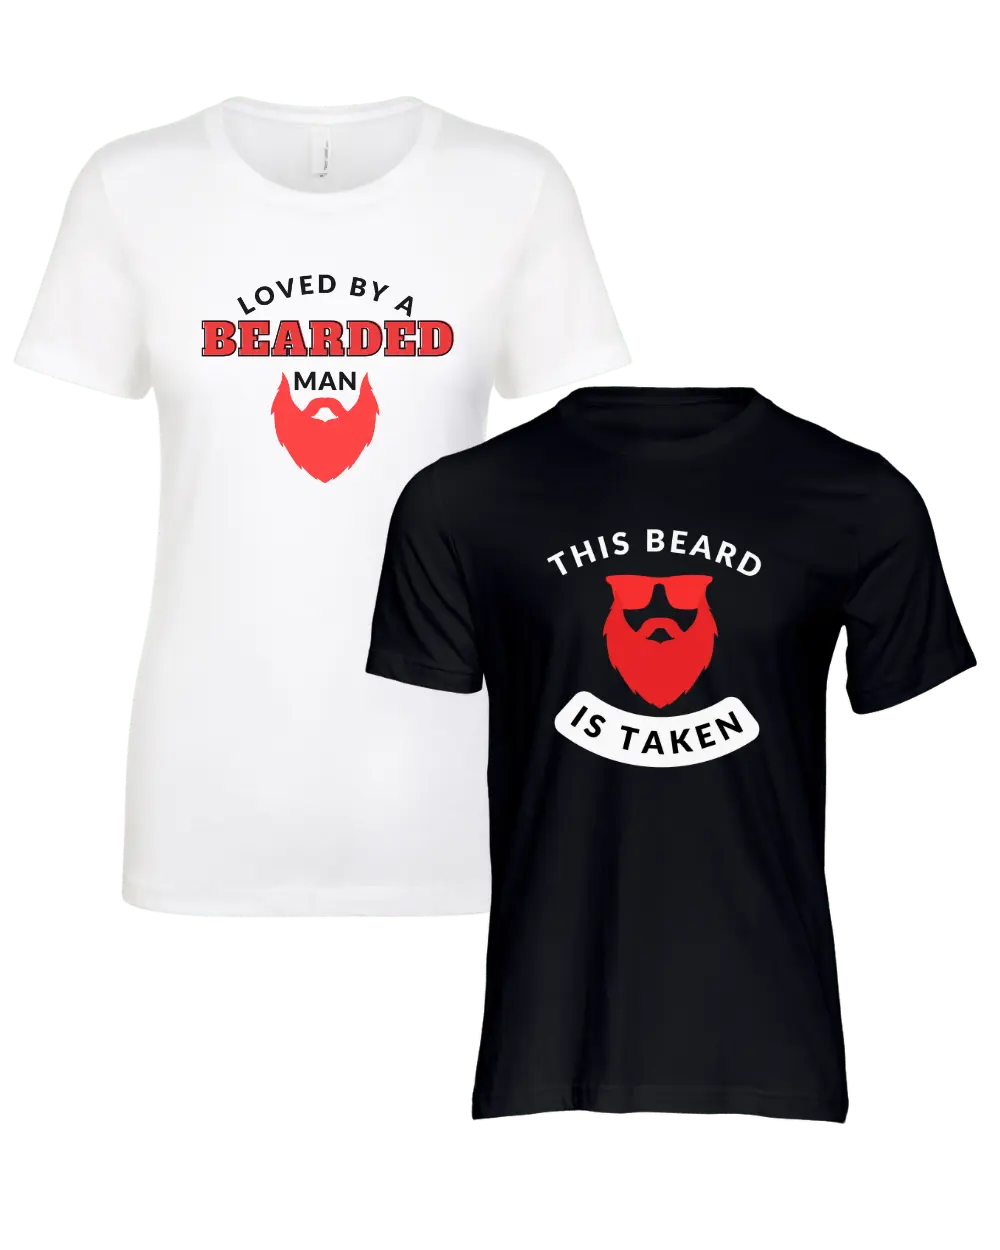 Loved By A Bearded Man/This Beard is Taken Couple T-Shirt